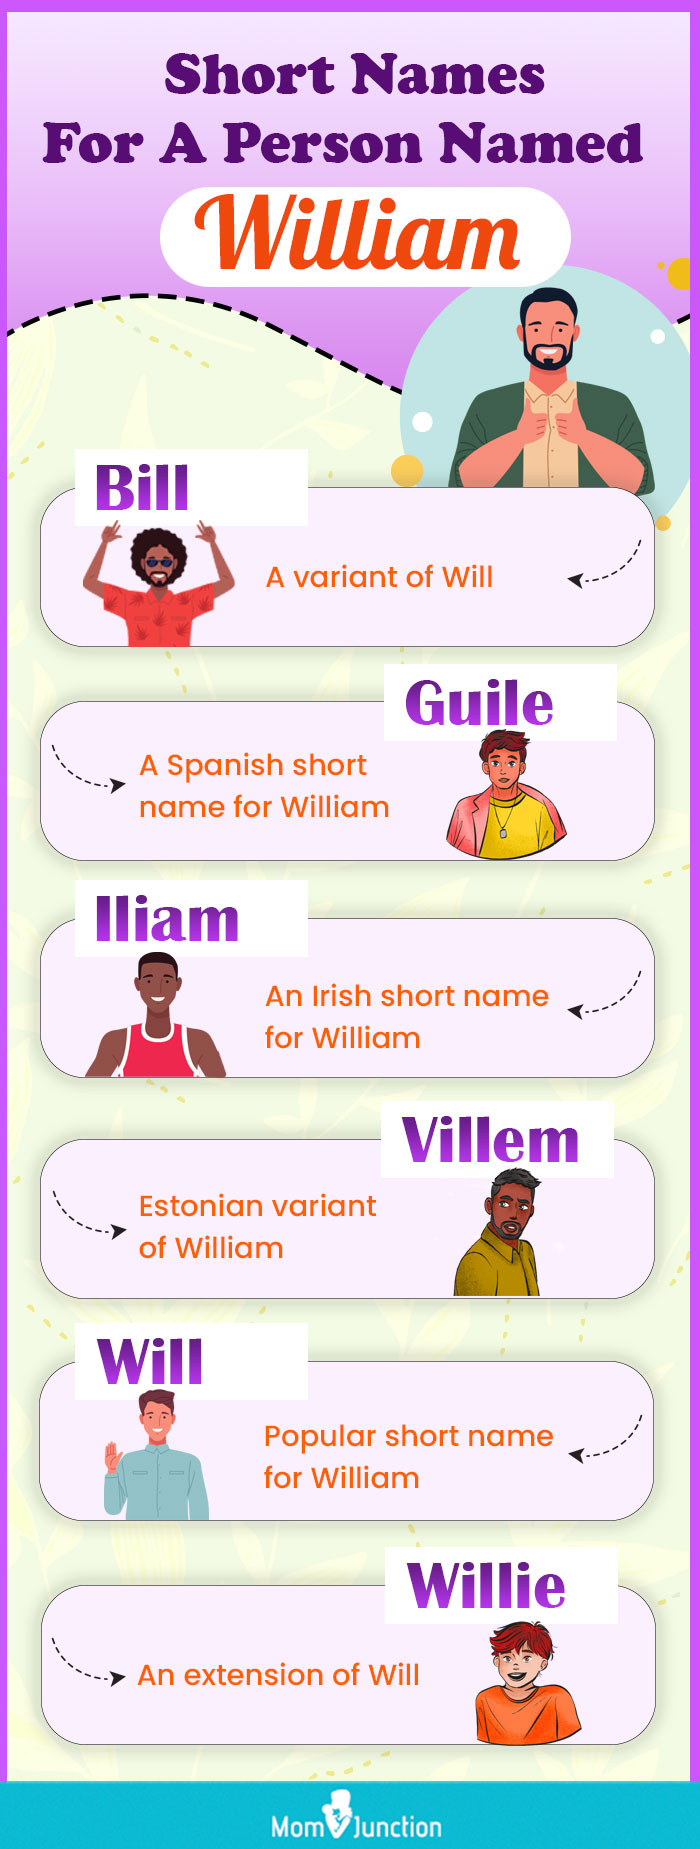 short names for a person named william (infographic)